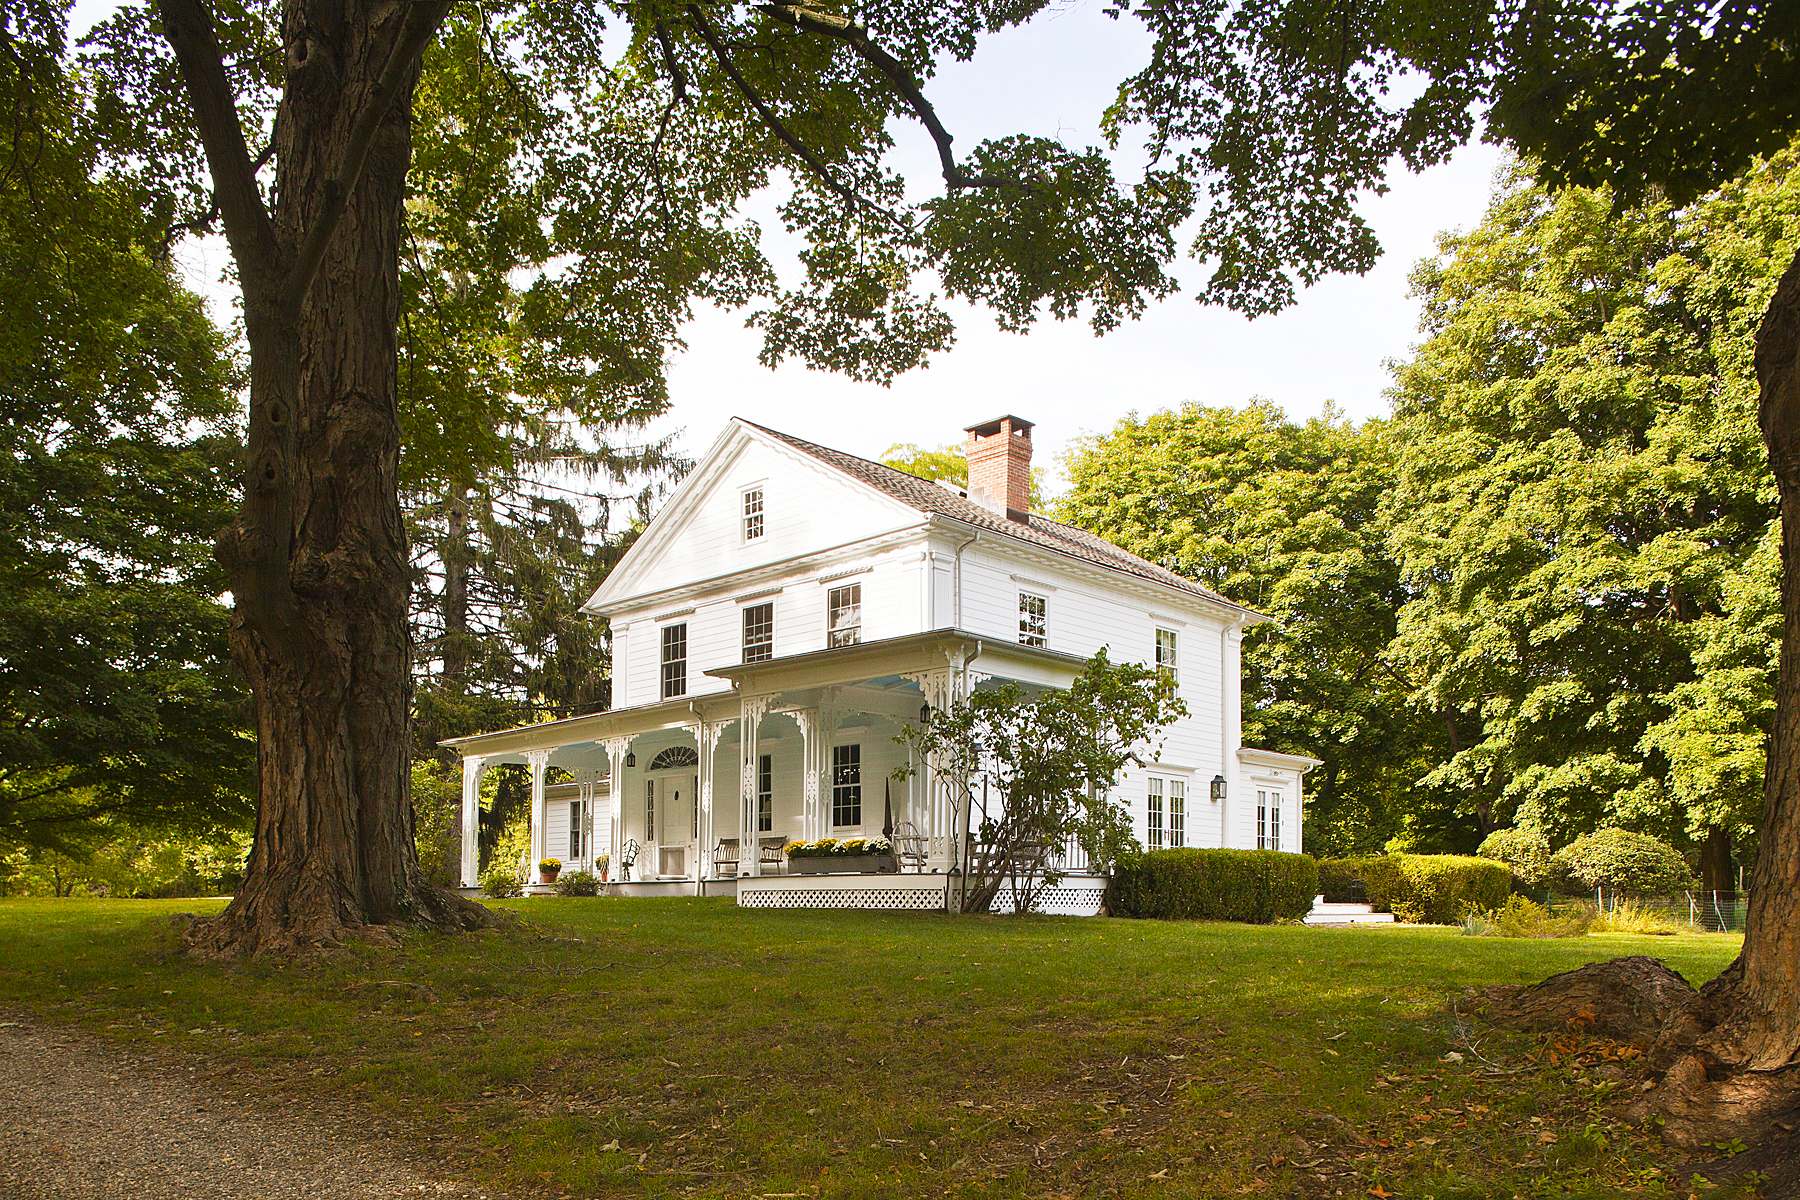 On the market: An honored historic home in Southport